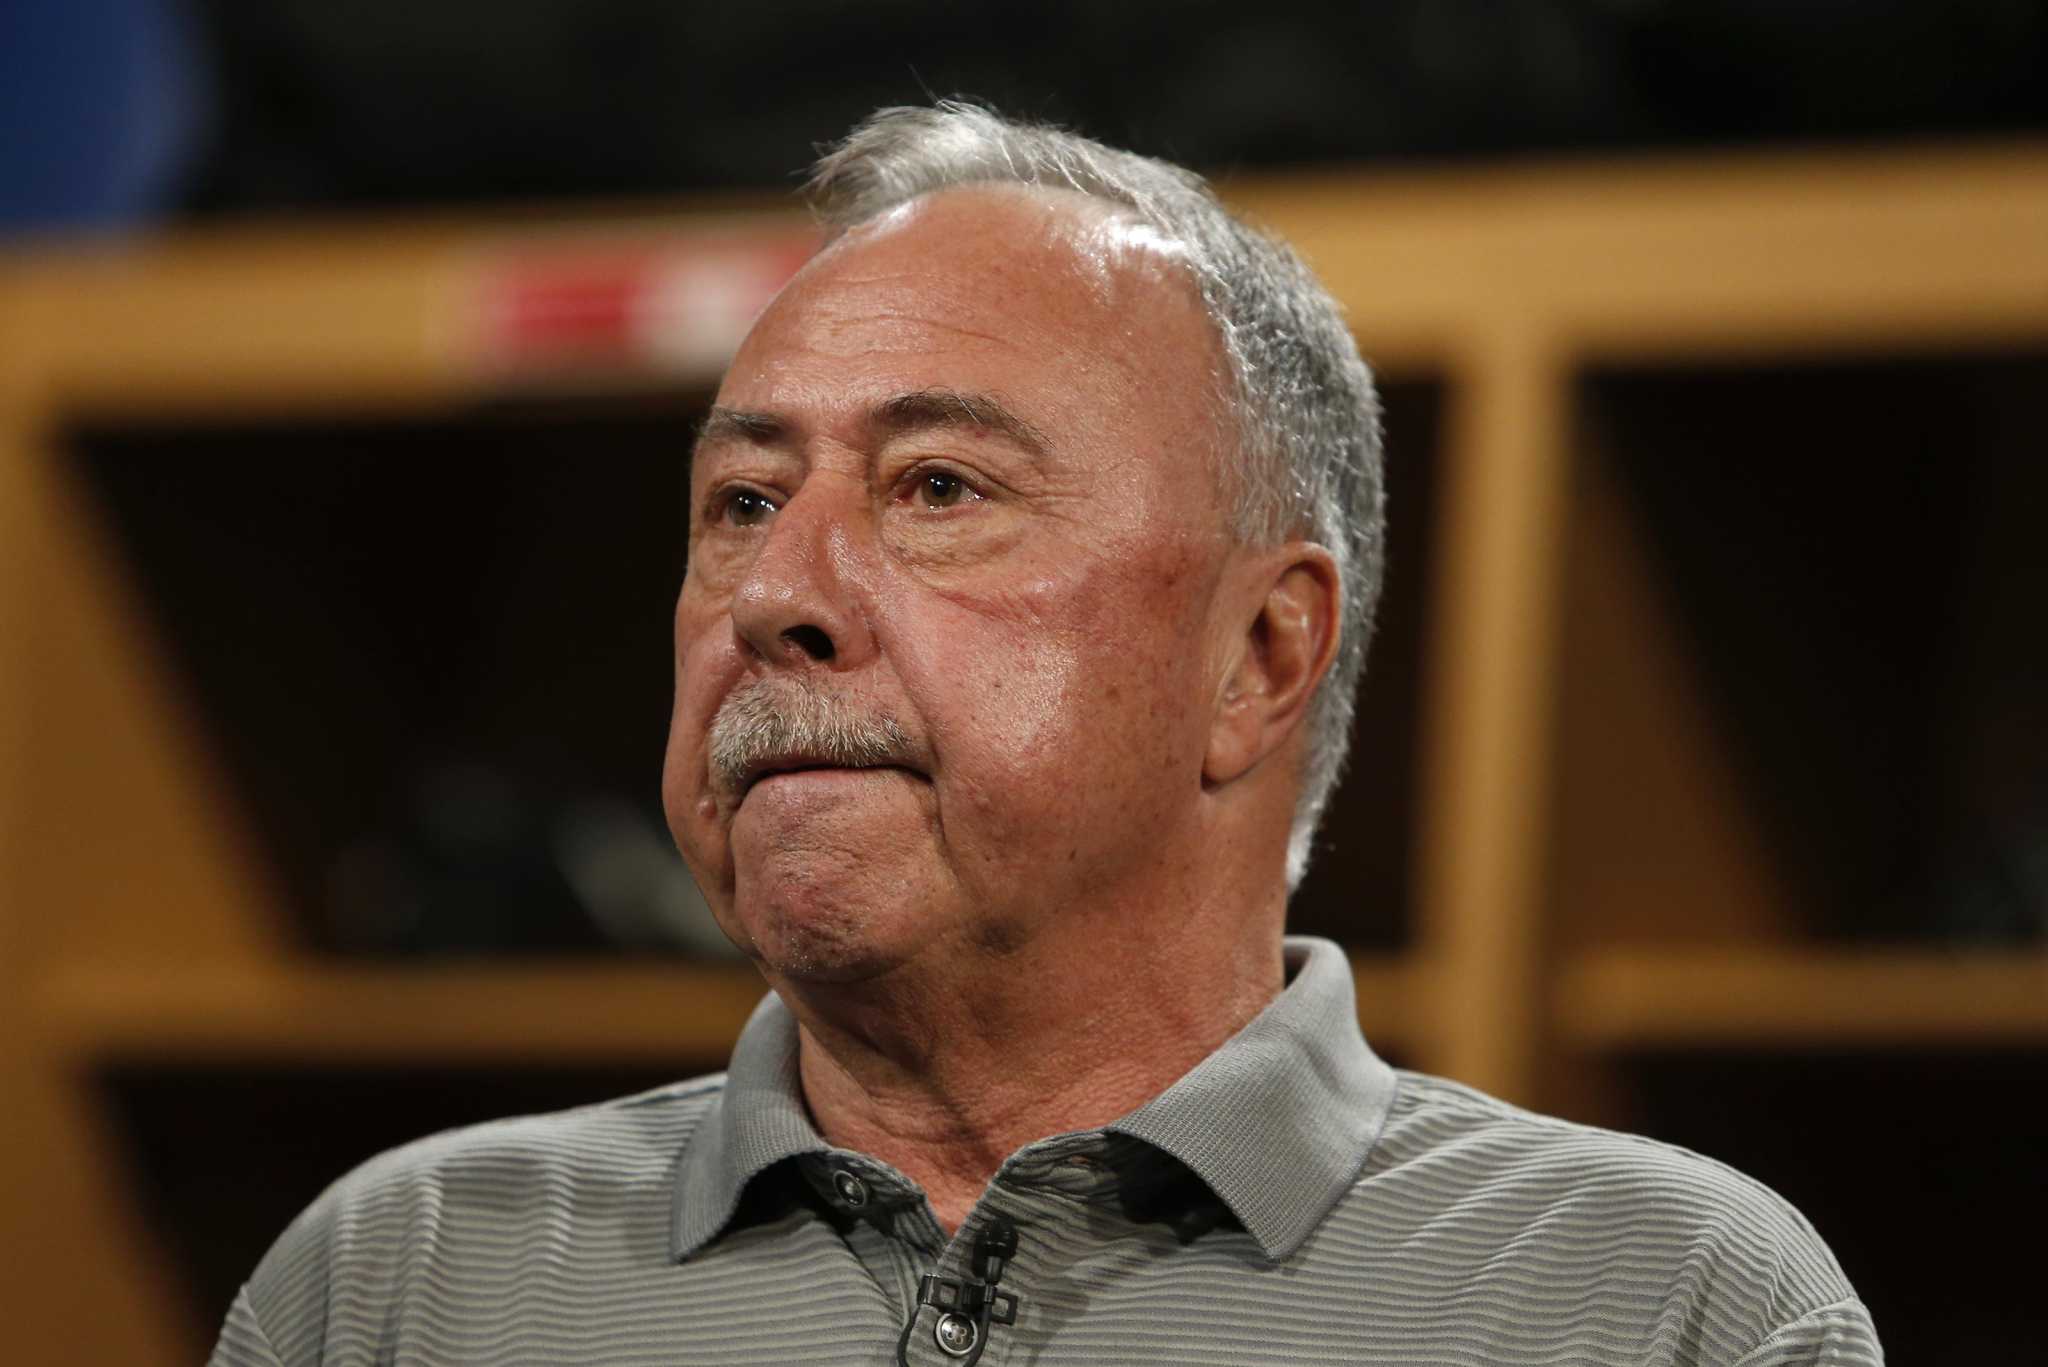 Jerry Remy 'resting comfortably' at Mass General after leaving